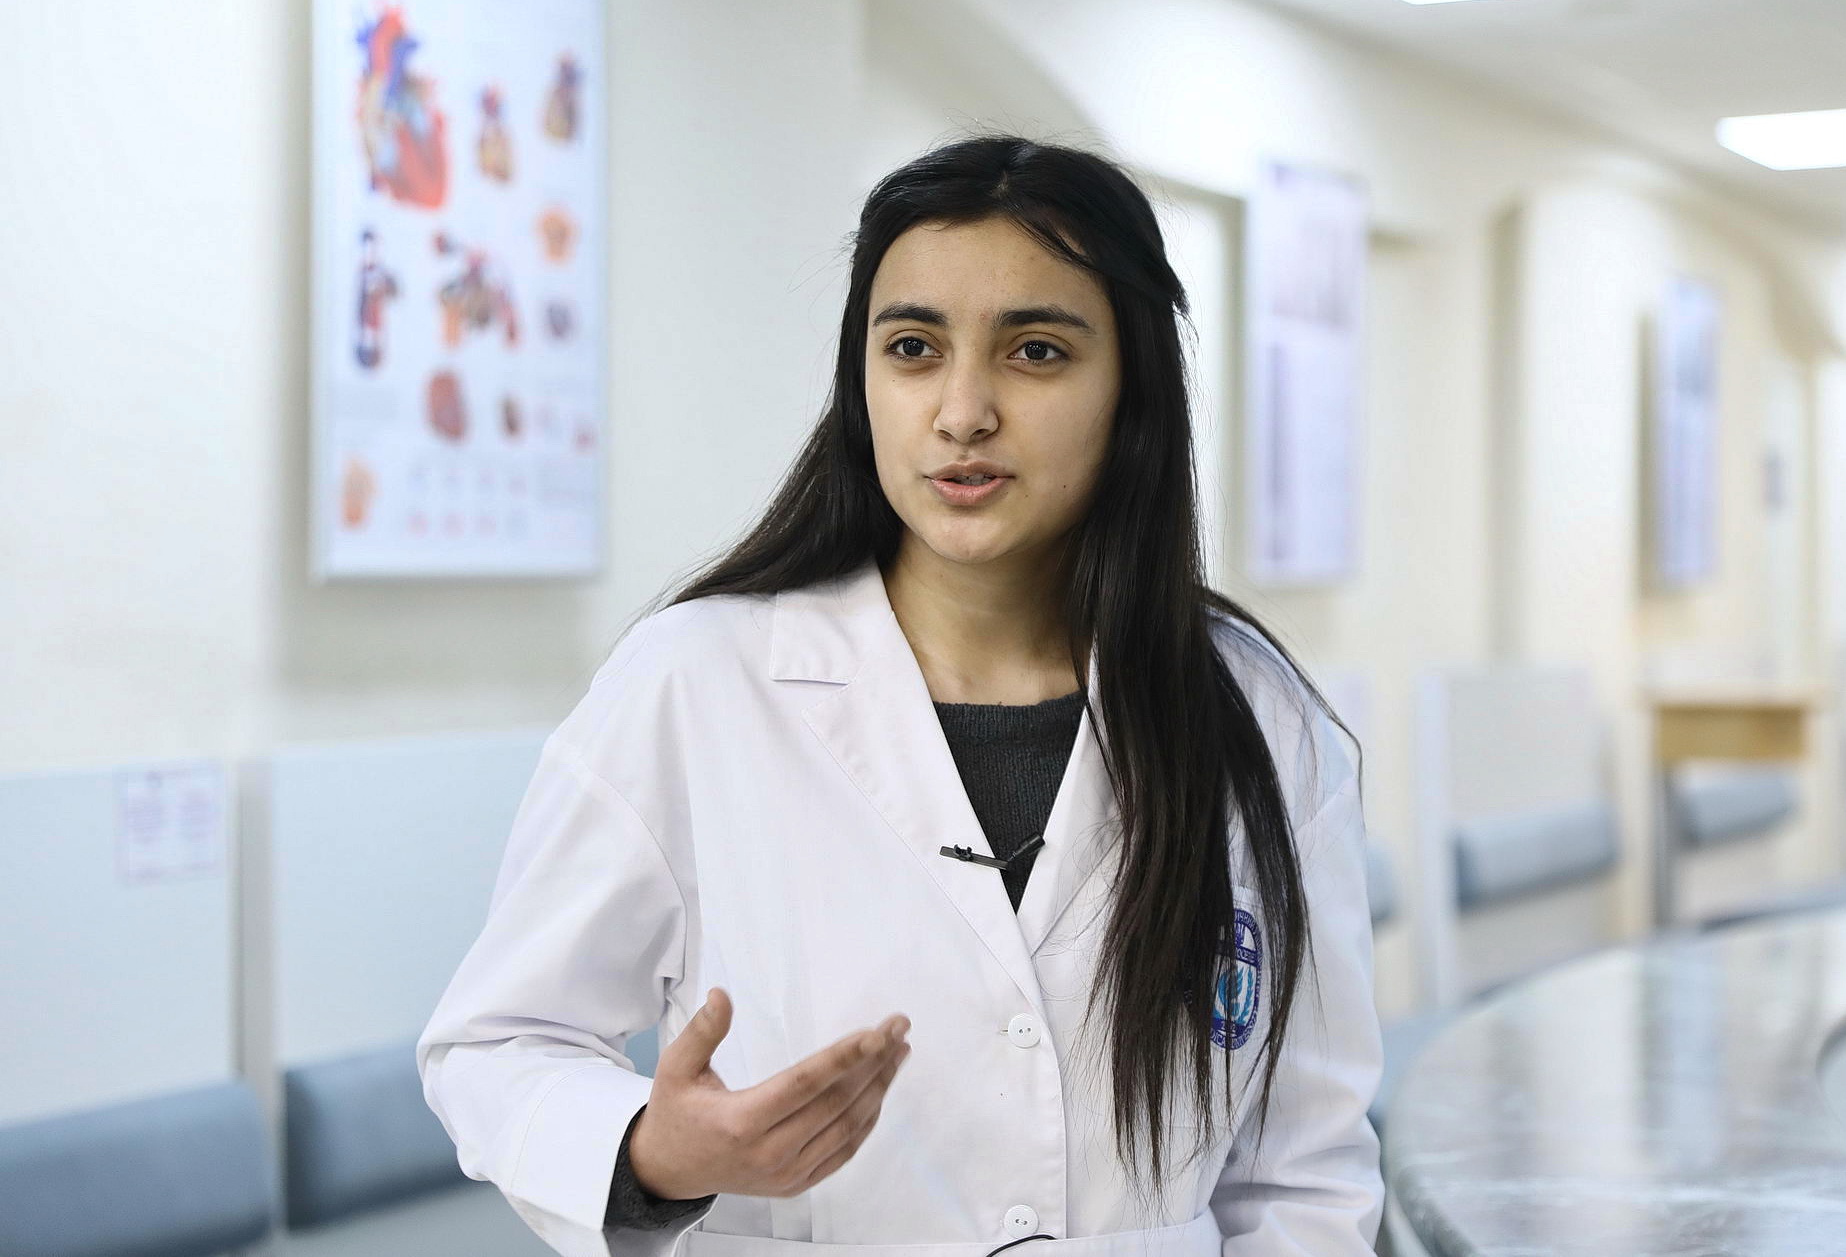 Rupali Sachdala, 20, a second-year student at Kyiv Medical University, speaks to the Kyiv Post on Jan. 16, 2020. She believes that Ukraine is a safe country for foreign students and the war in the Donbas didn&#8217;t influence her decision to study in Ukraine. (Oleg Petrasiuk)